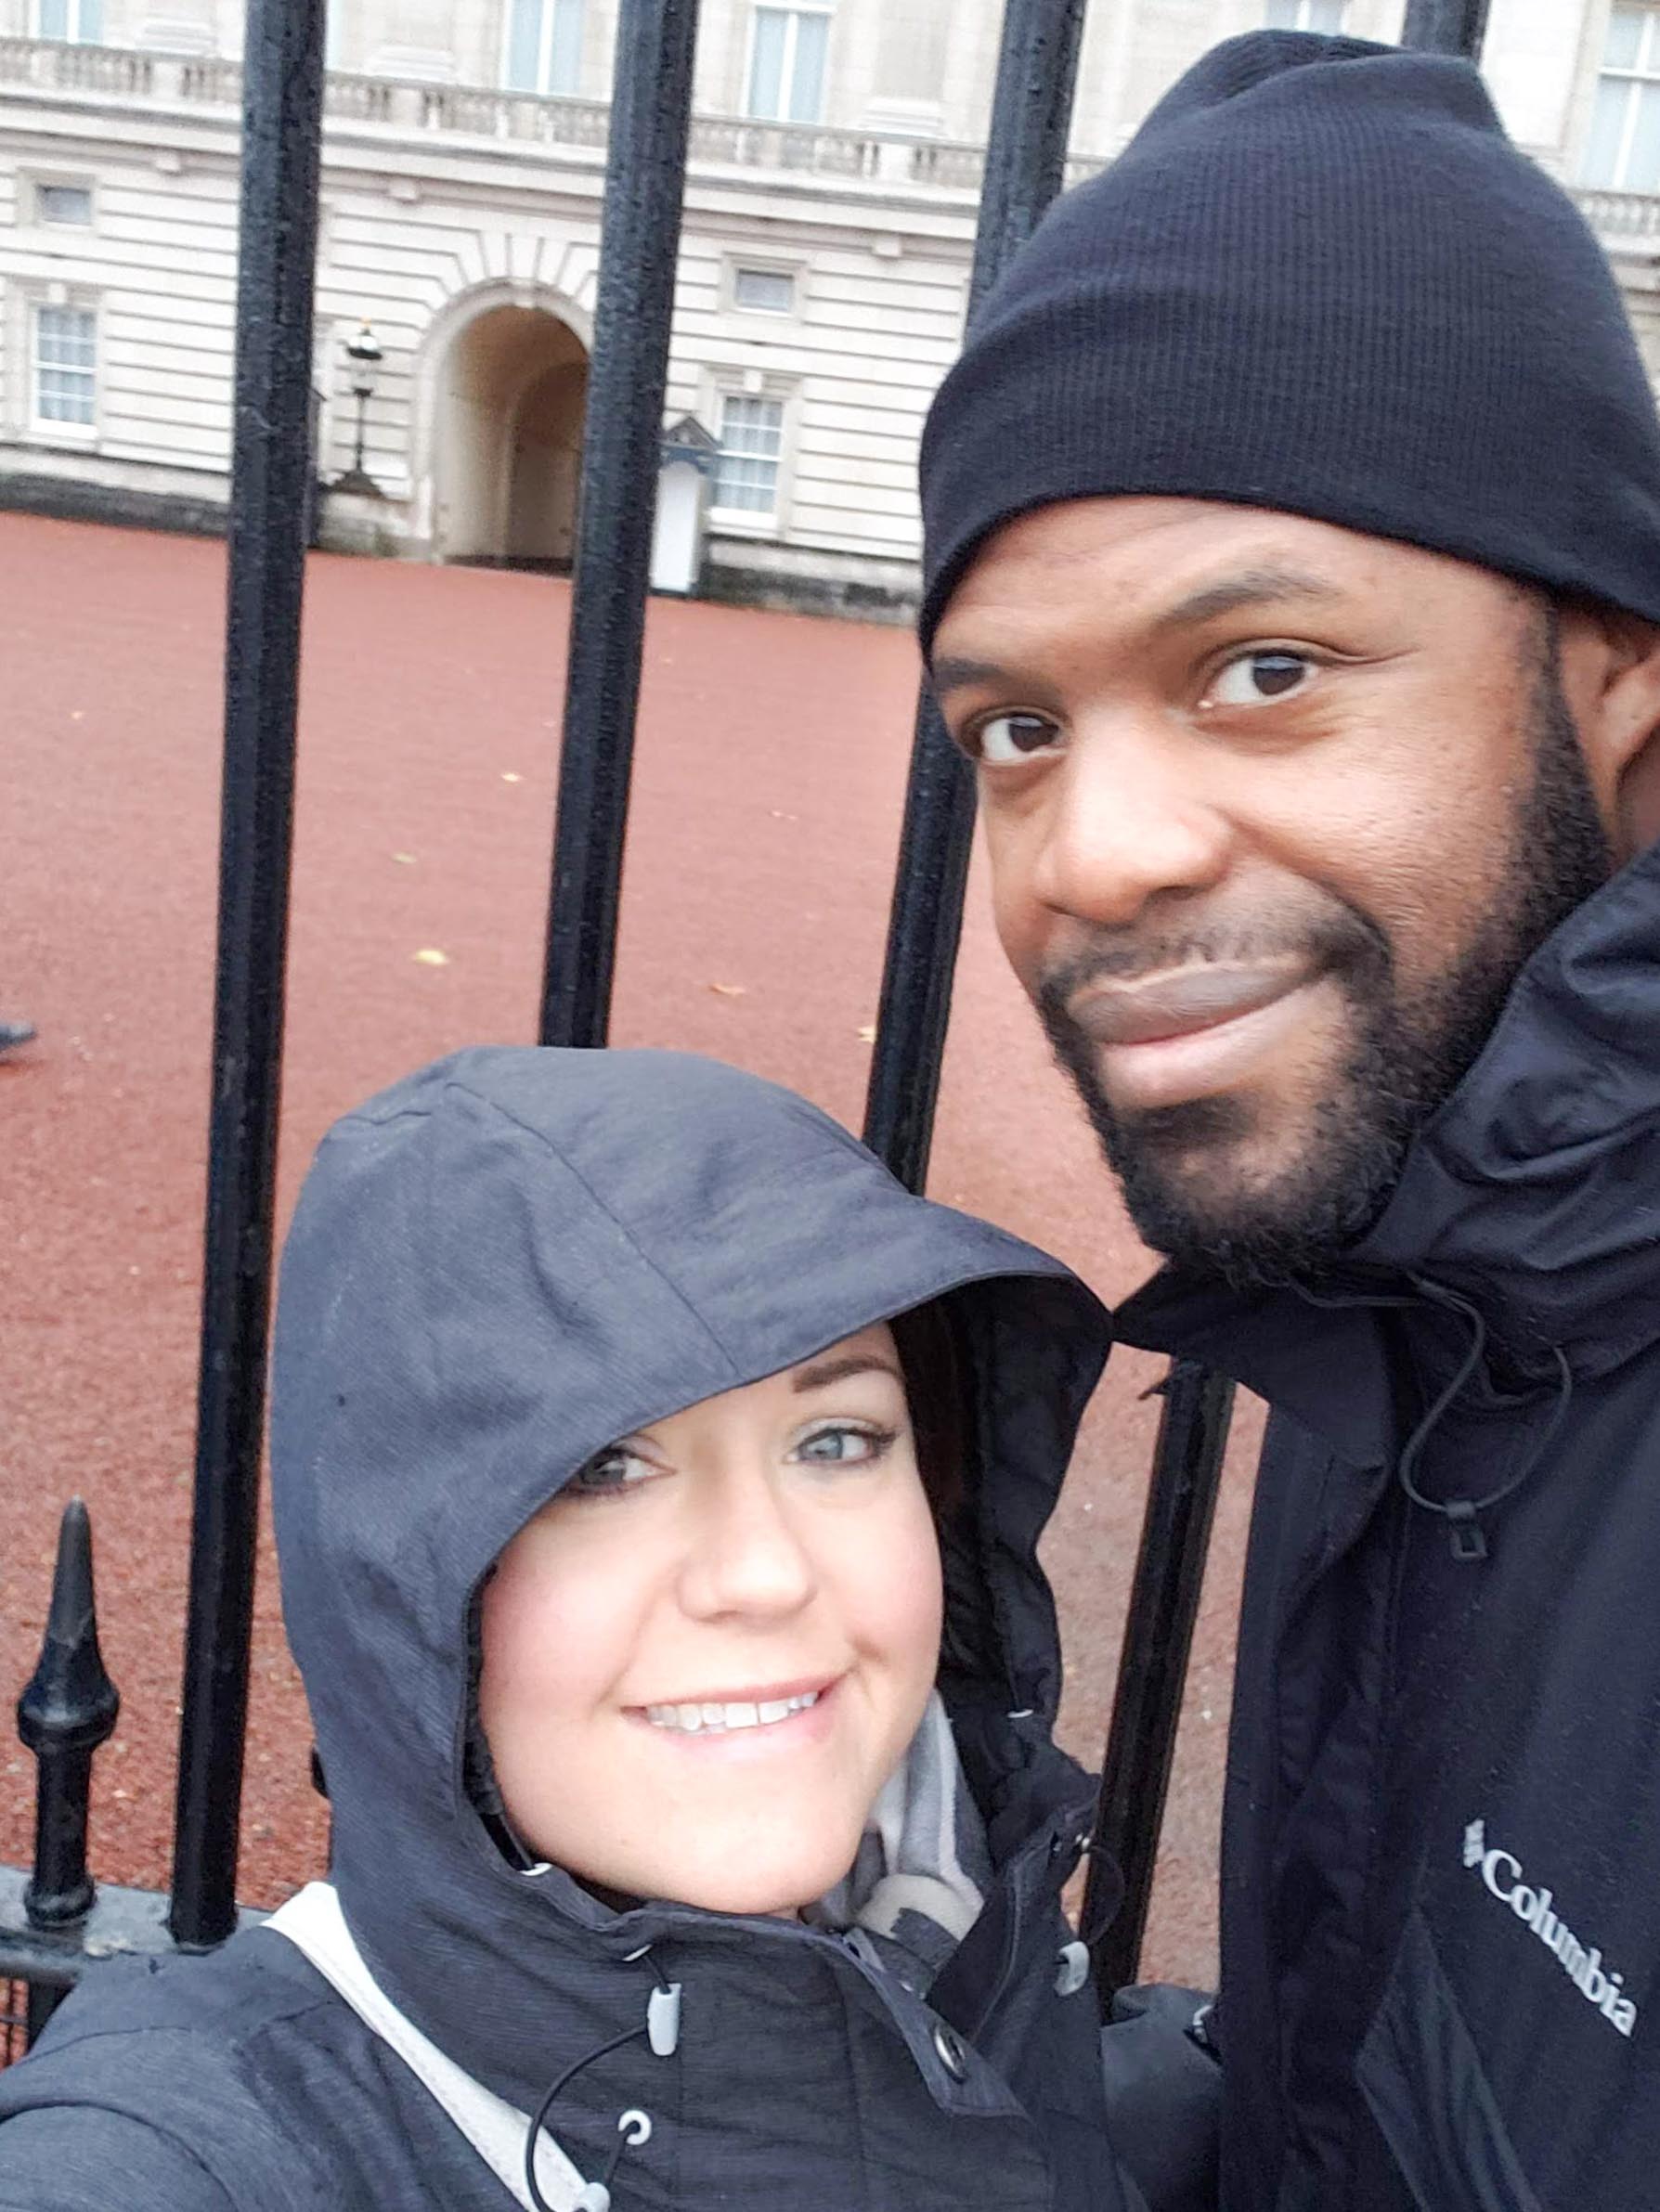 Jill and Desmond lean in for a photo outside buckingham palace gates